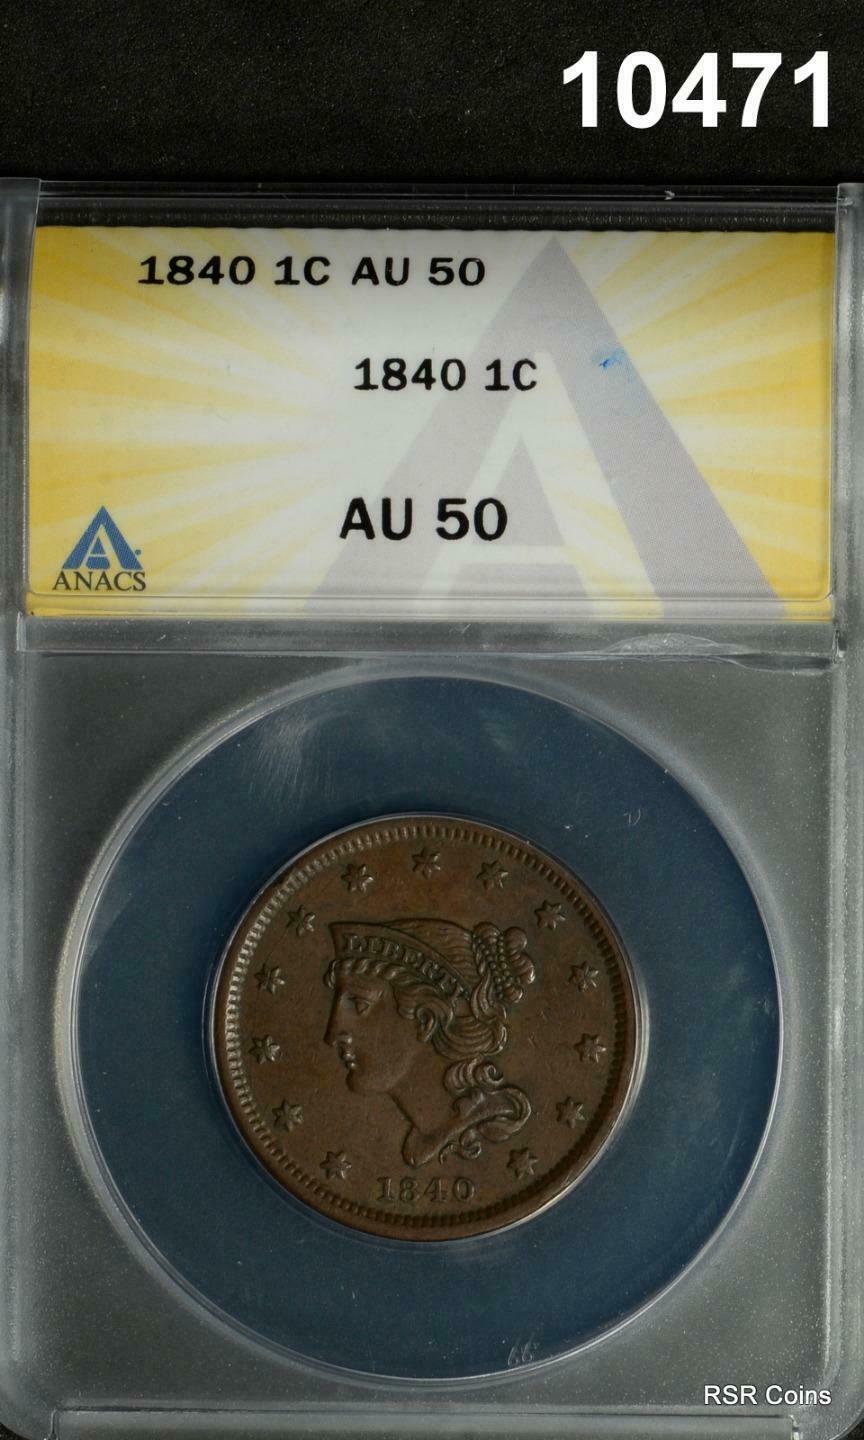 1840 BRAIDED LARGE CENT ANACS CERTIFIED AU50 ORIGINAL!! #10471